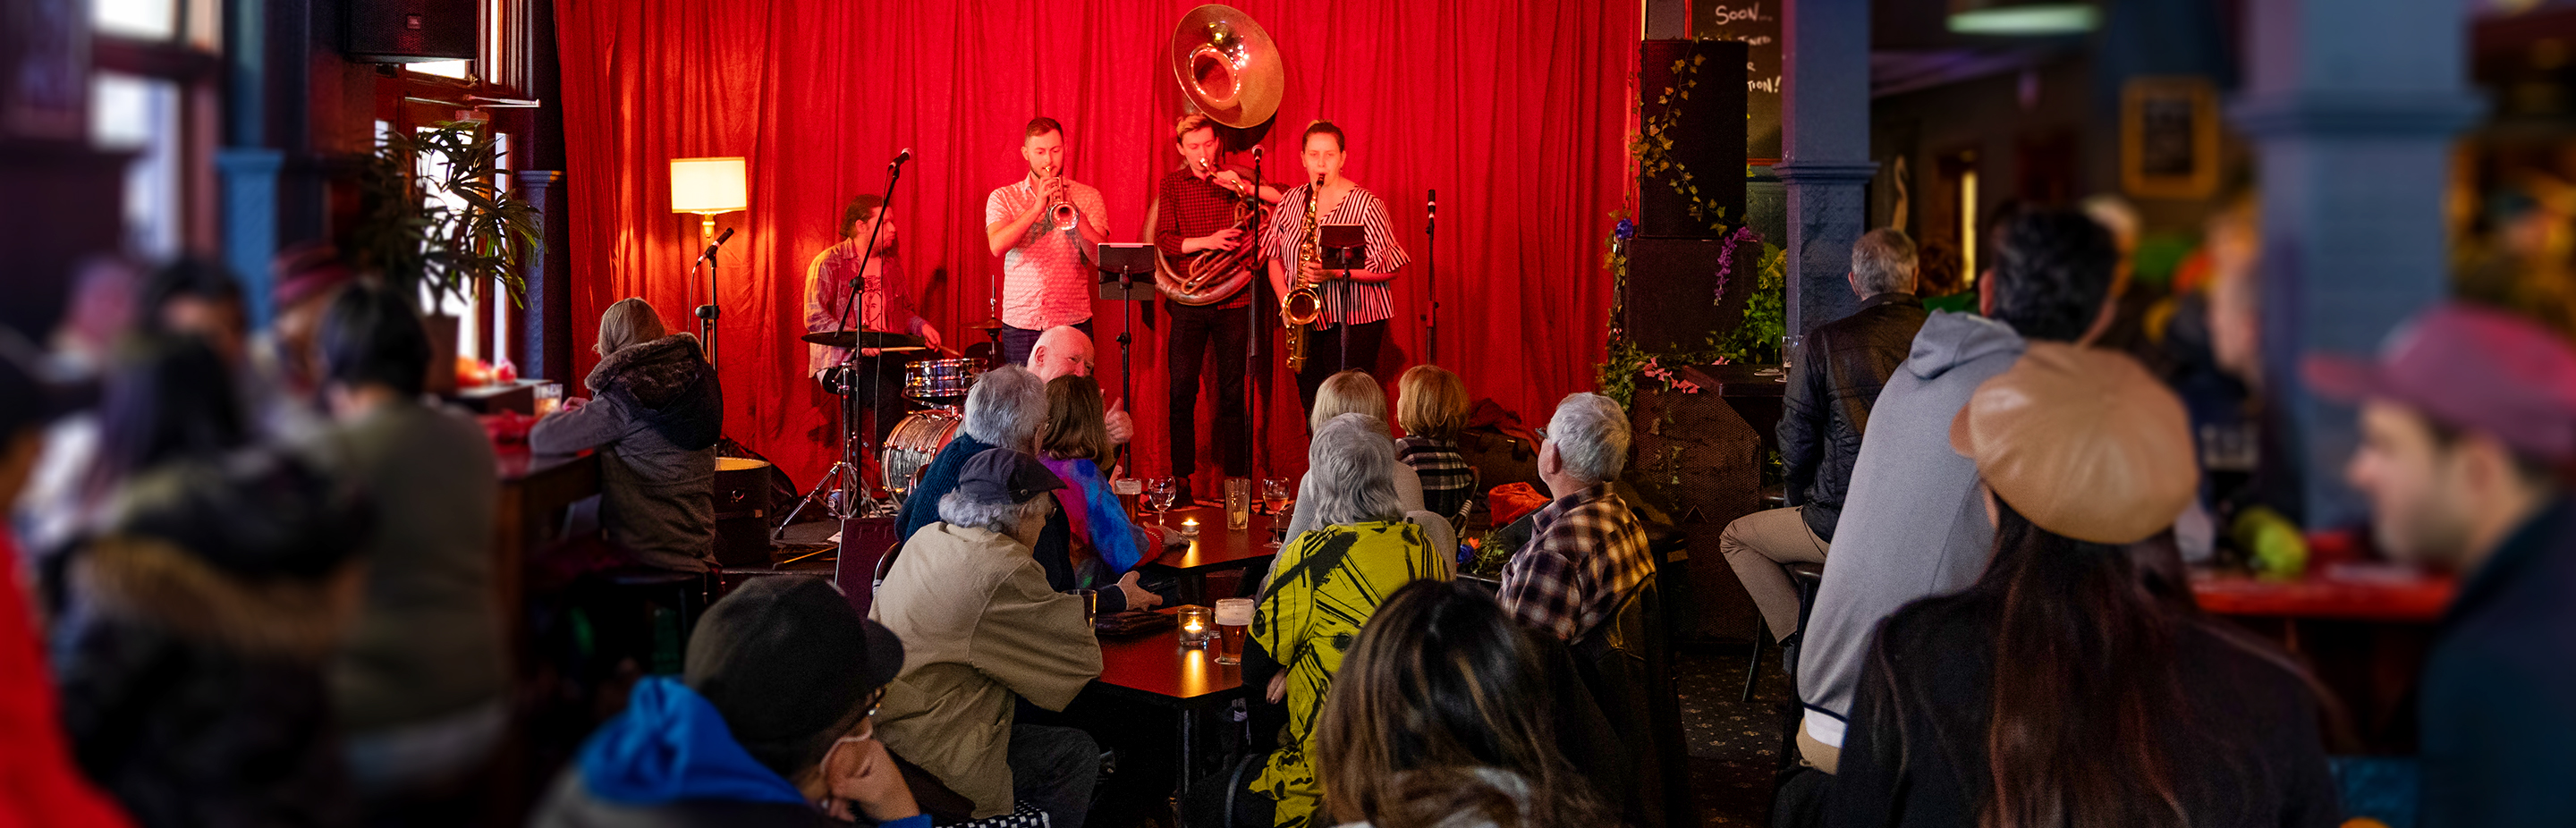 Band on a stage playing brass instruments in front of a red velvet curtain while an audience watches